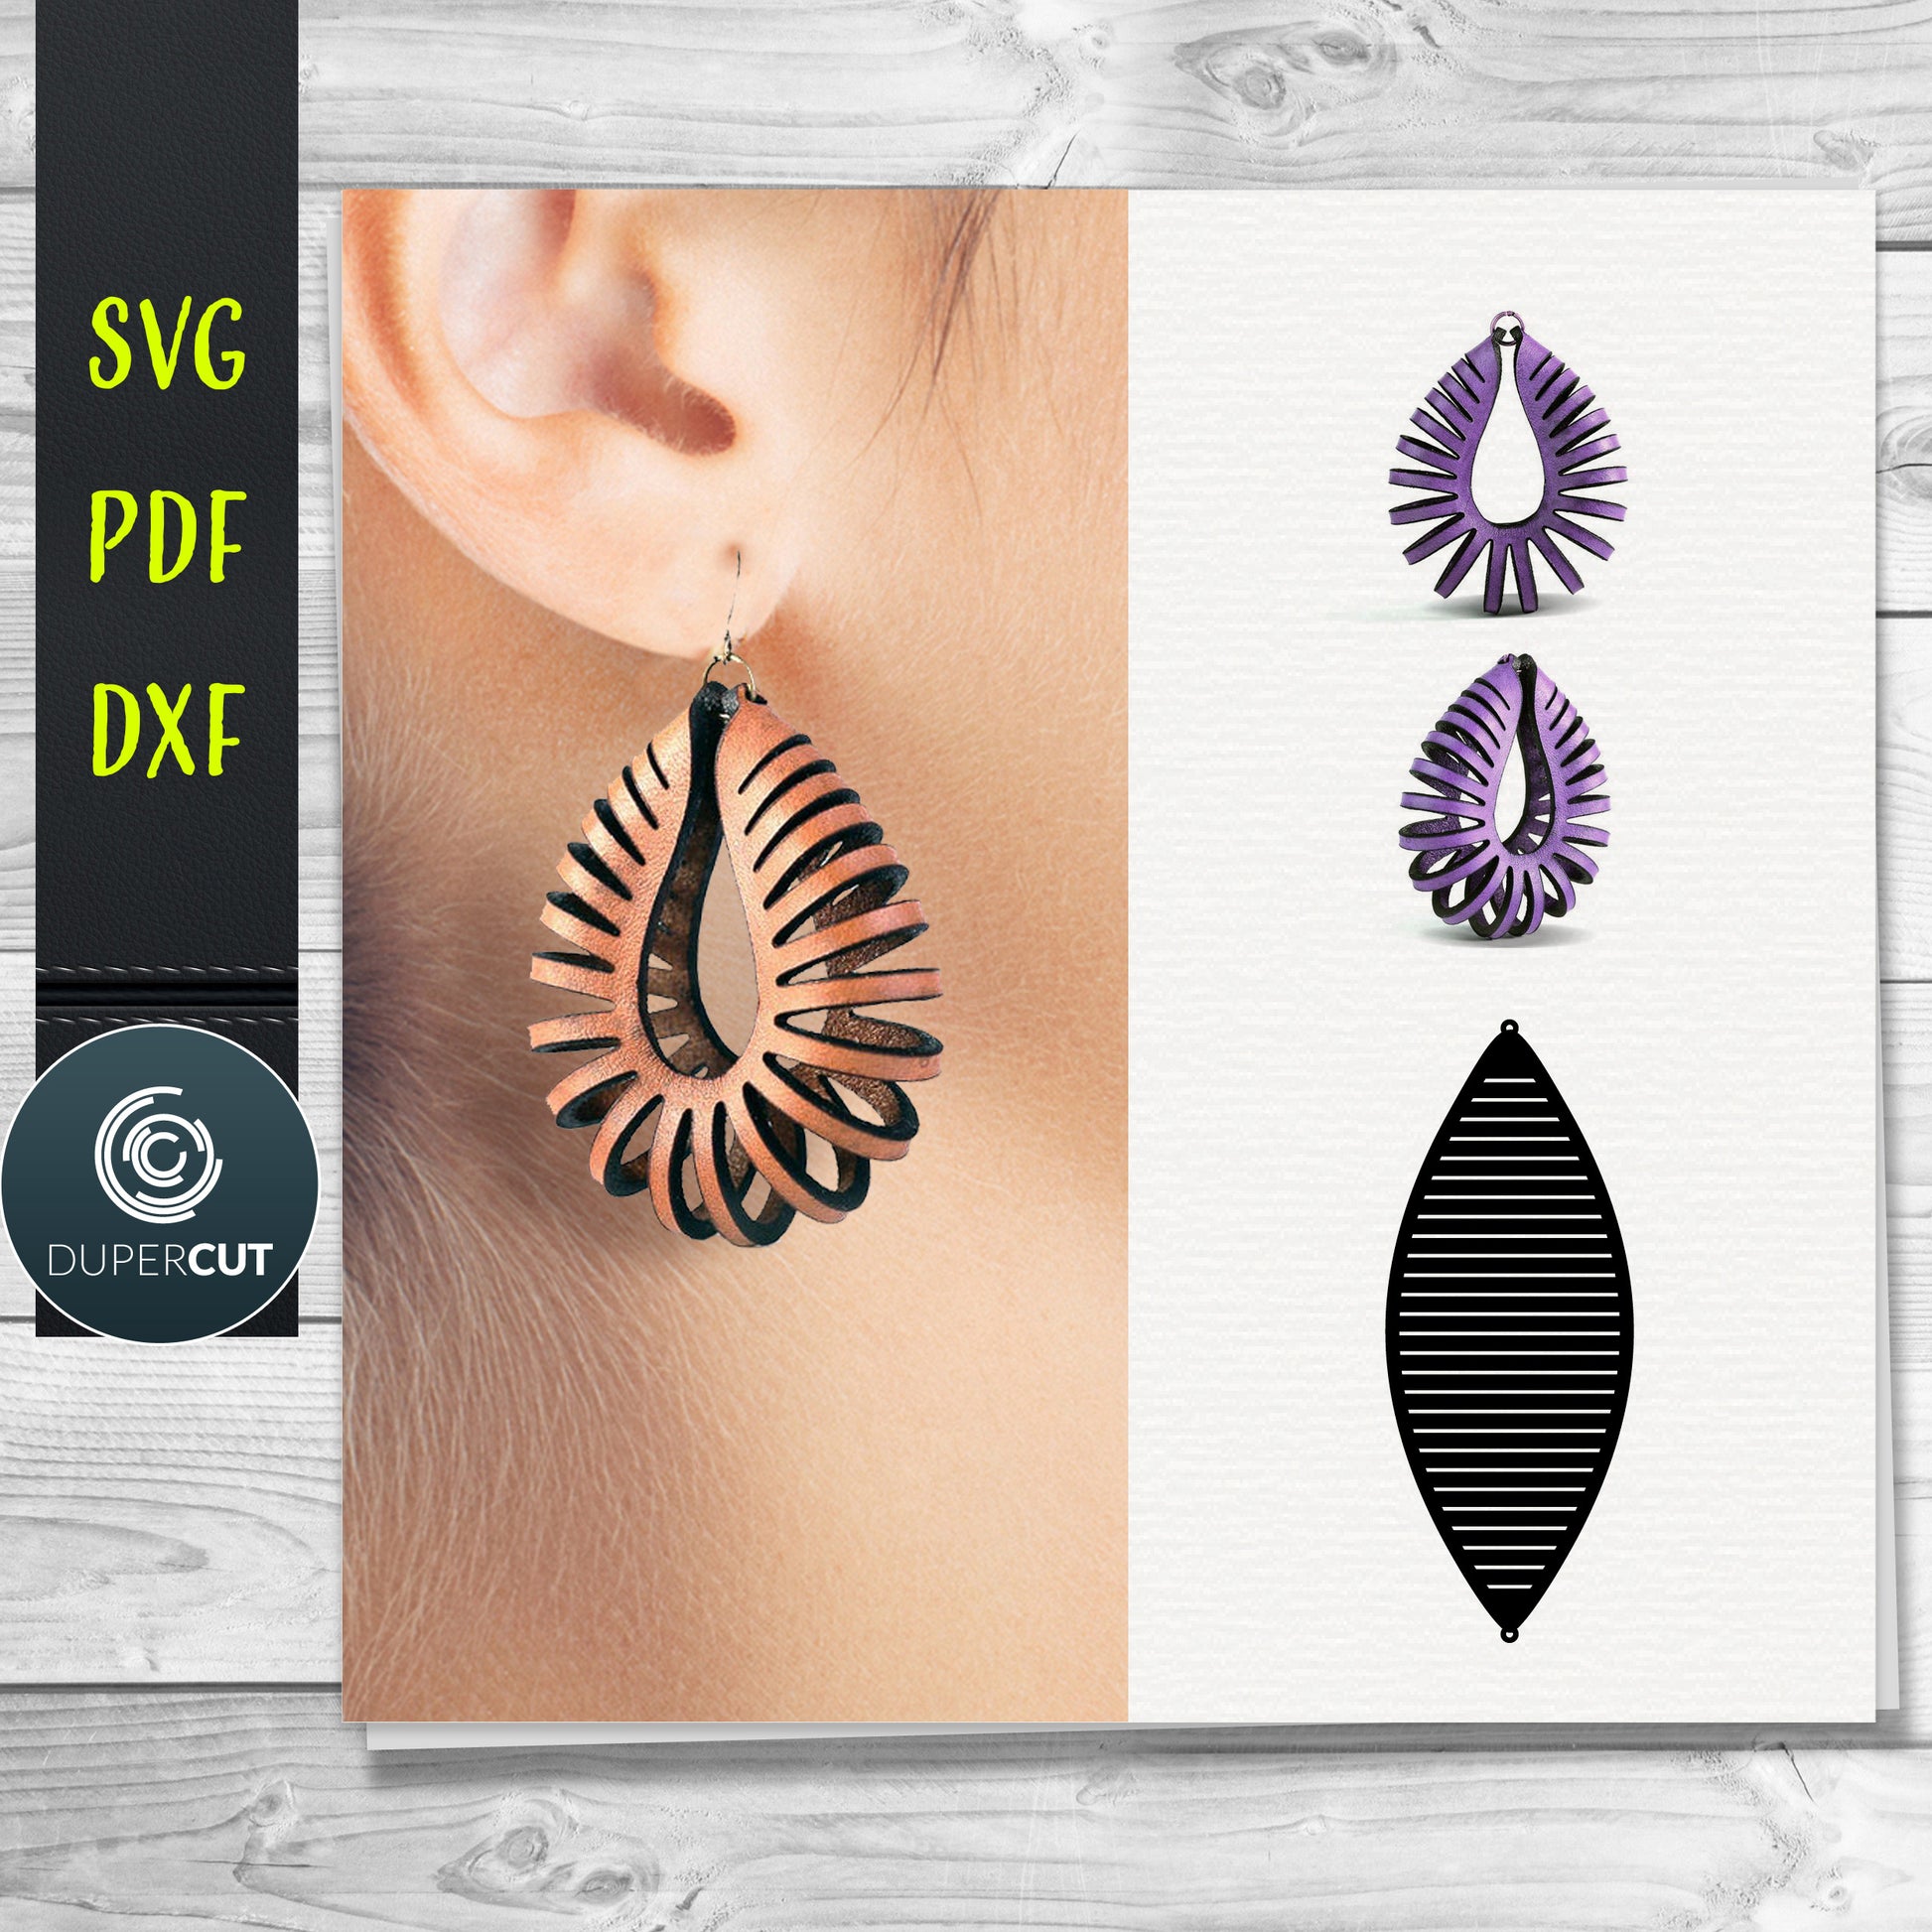 DIY Sculpted Leather Earrings SVG PDF DXF vector files. Jewellery making template for laser and cutting machines - Glowforge, Cricut, Silhouette Cameo.